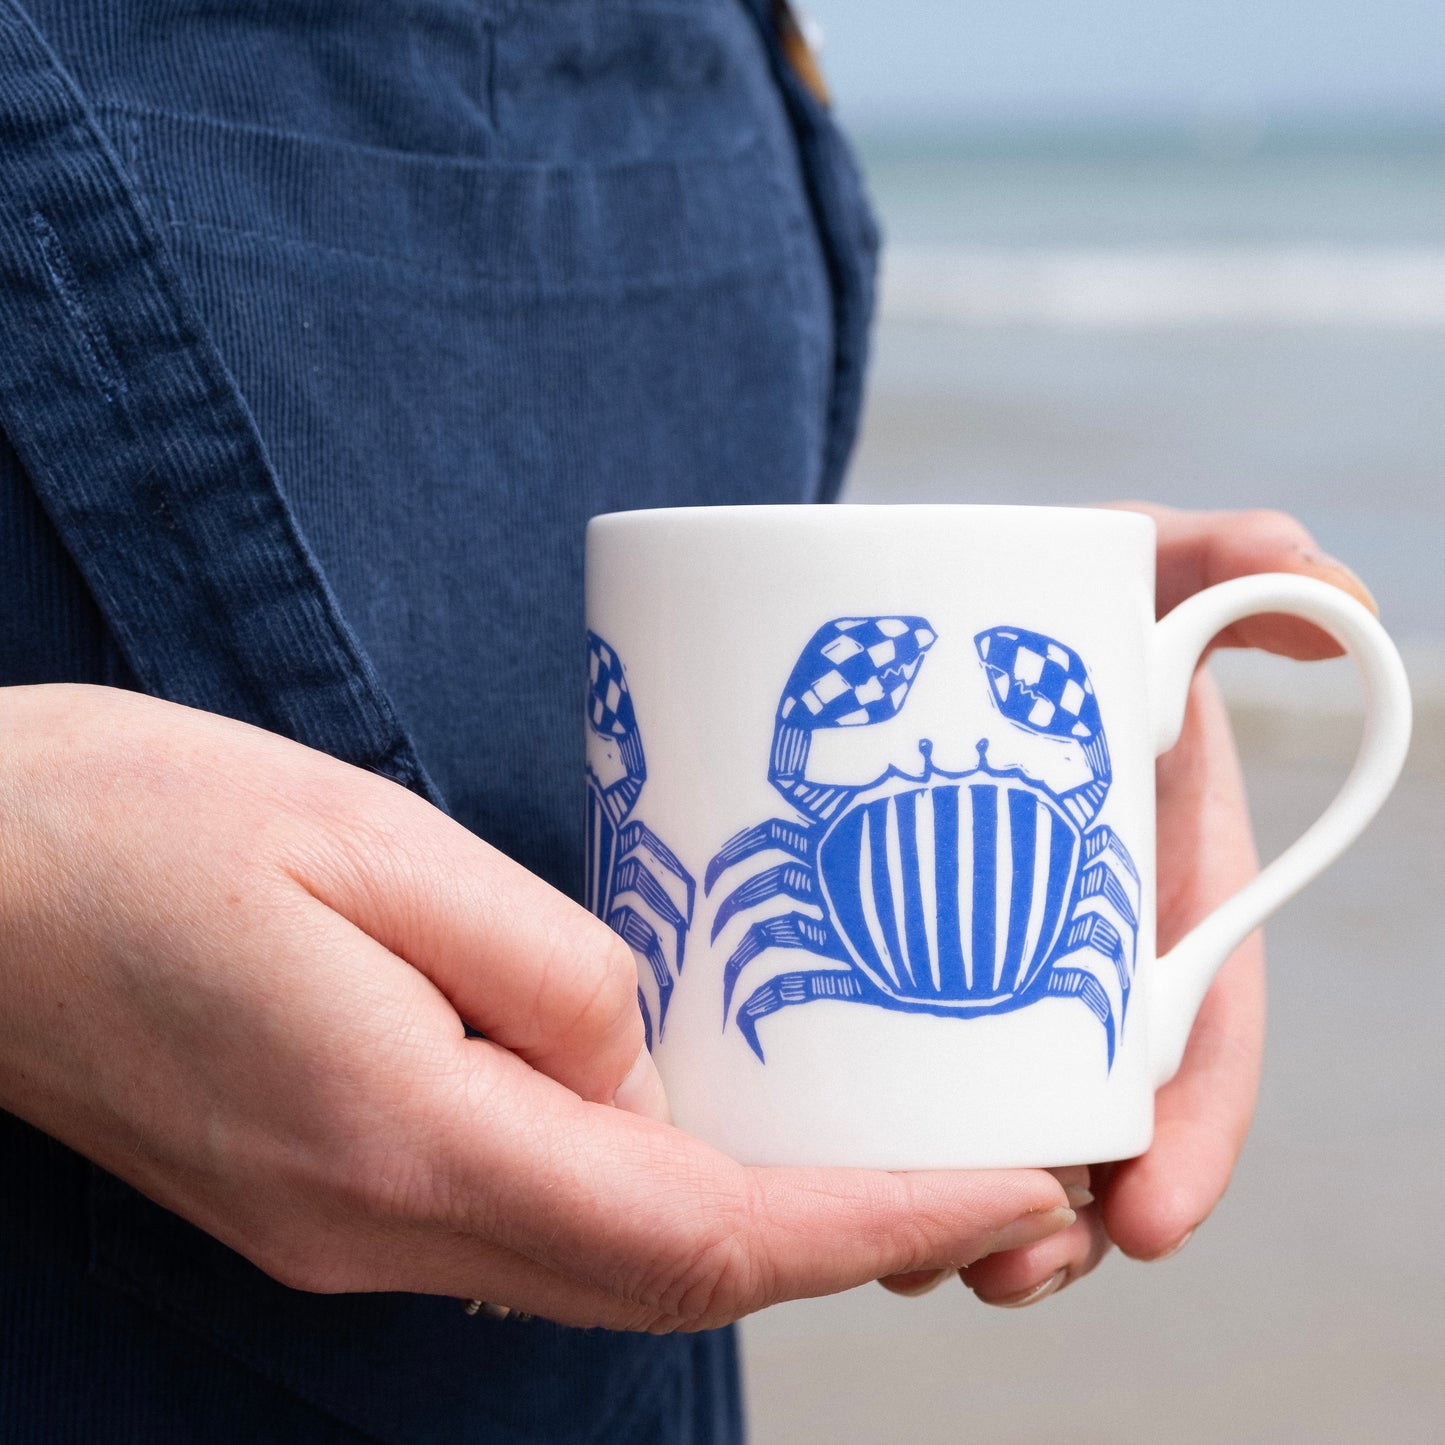 Fine bone china cup with blue crab print, held in hands